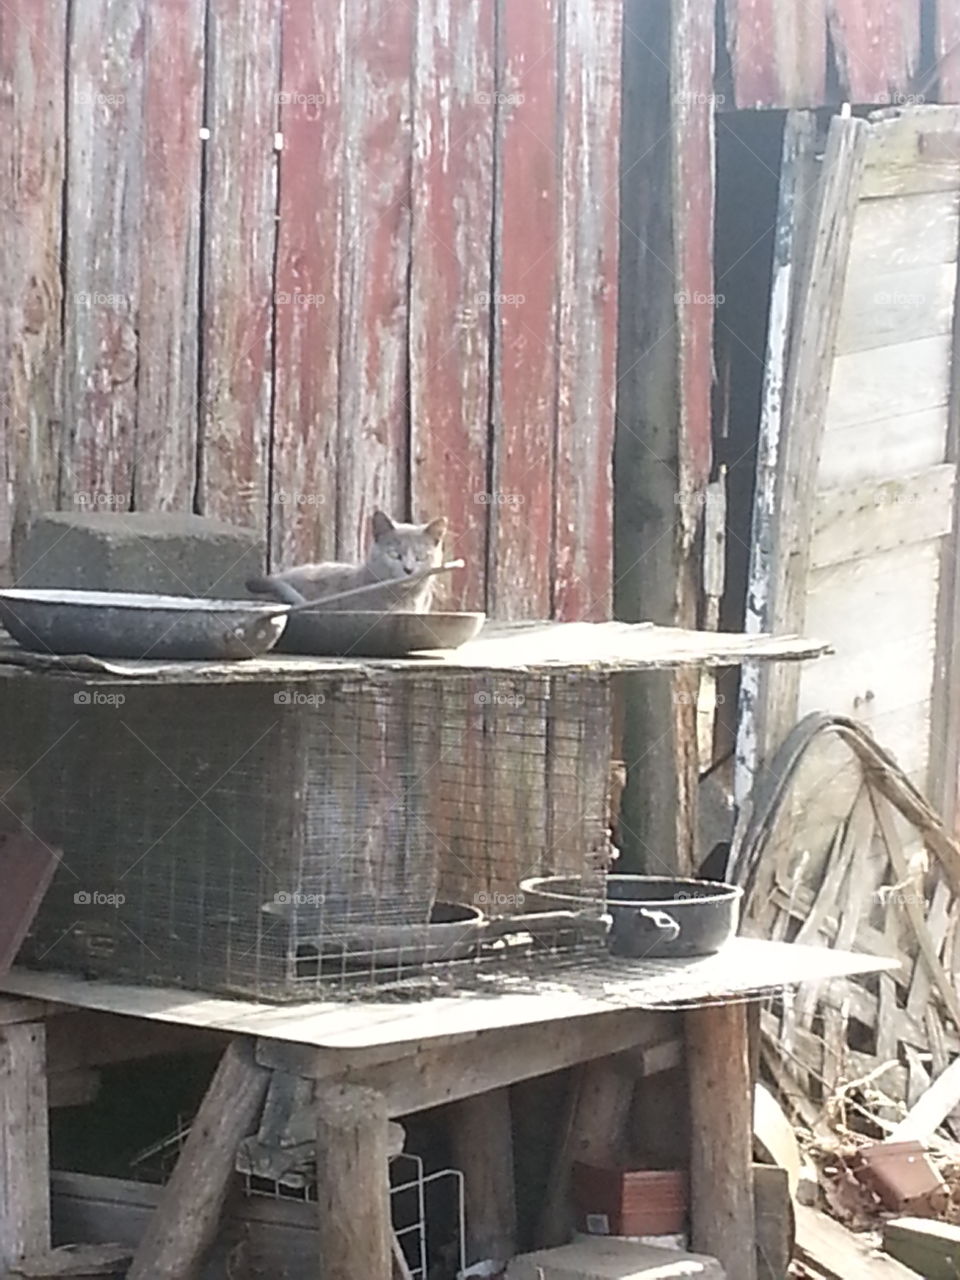 cat old barn. cat in a pan